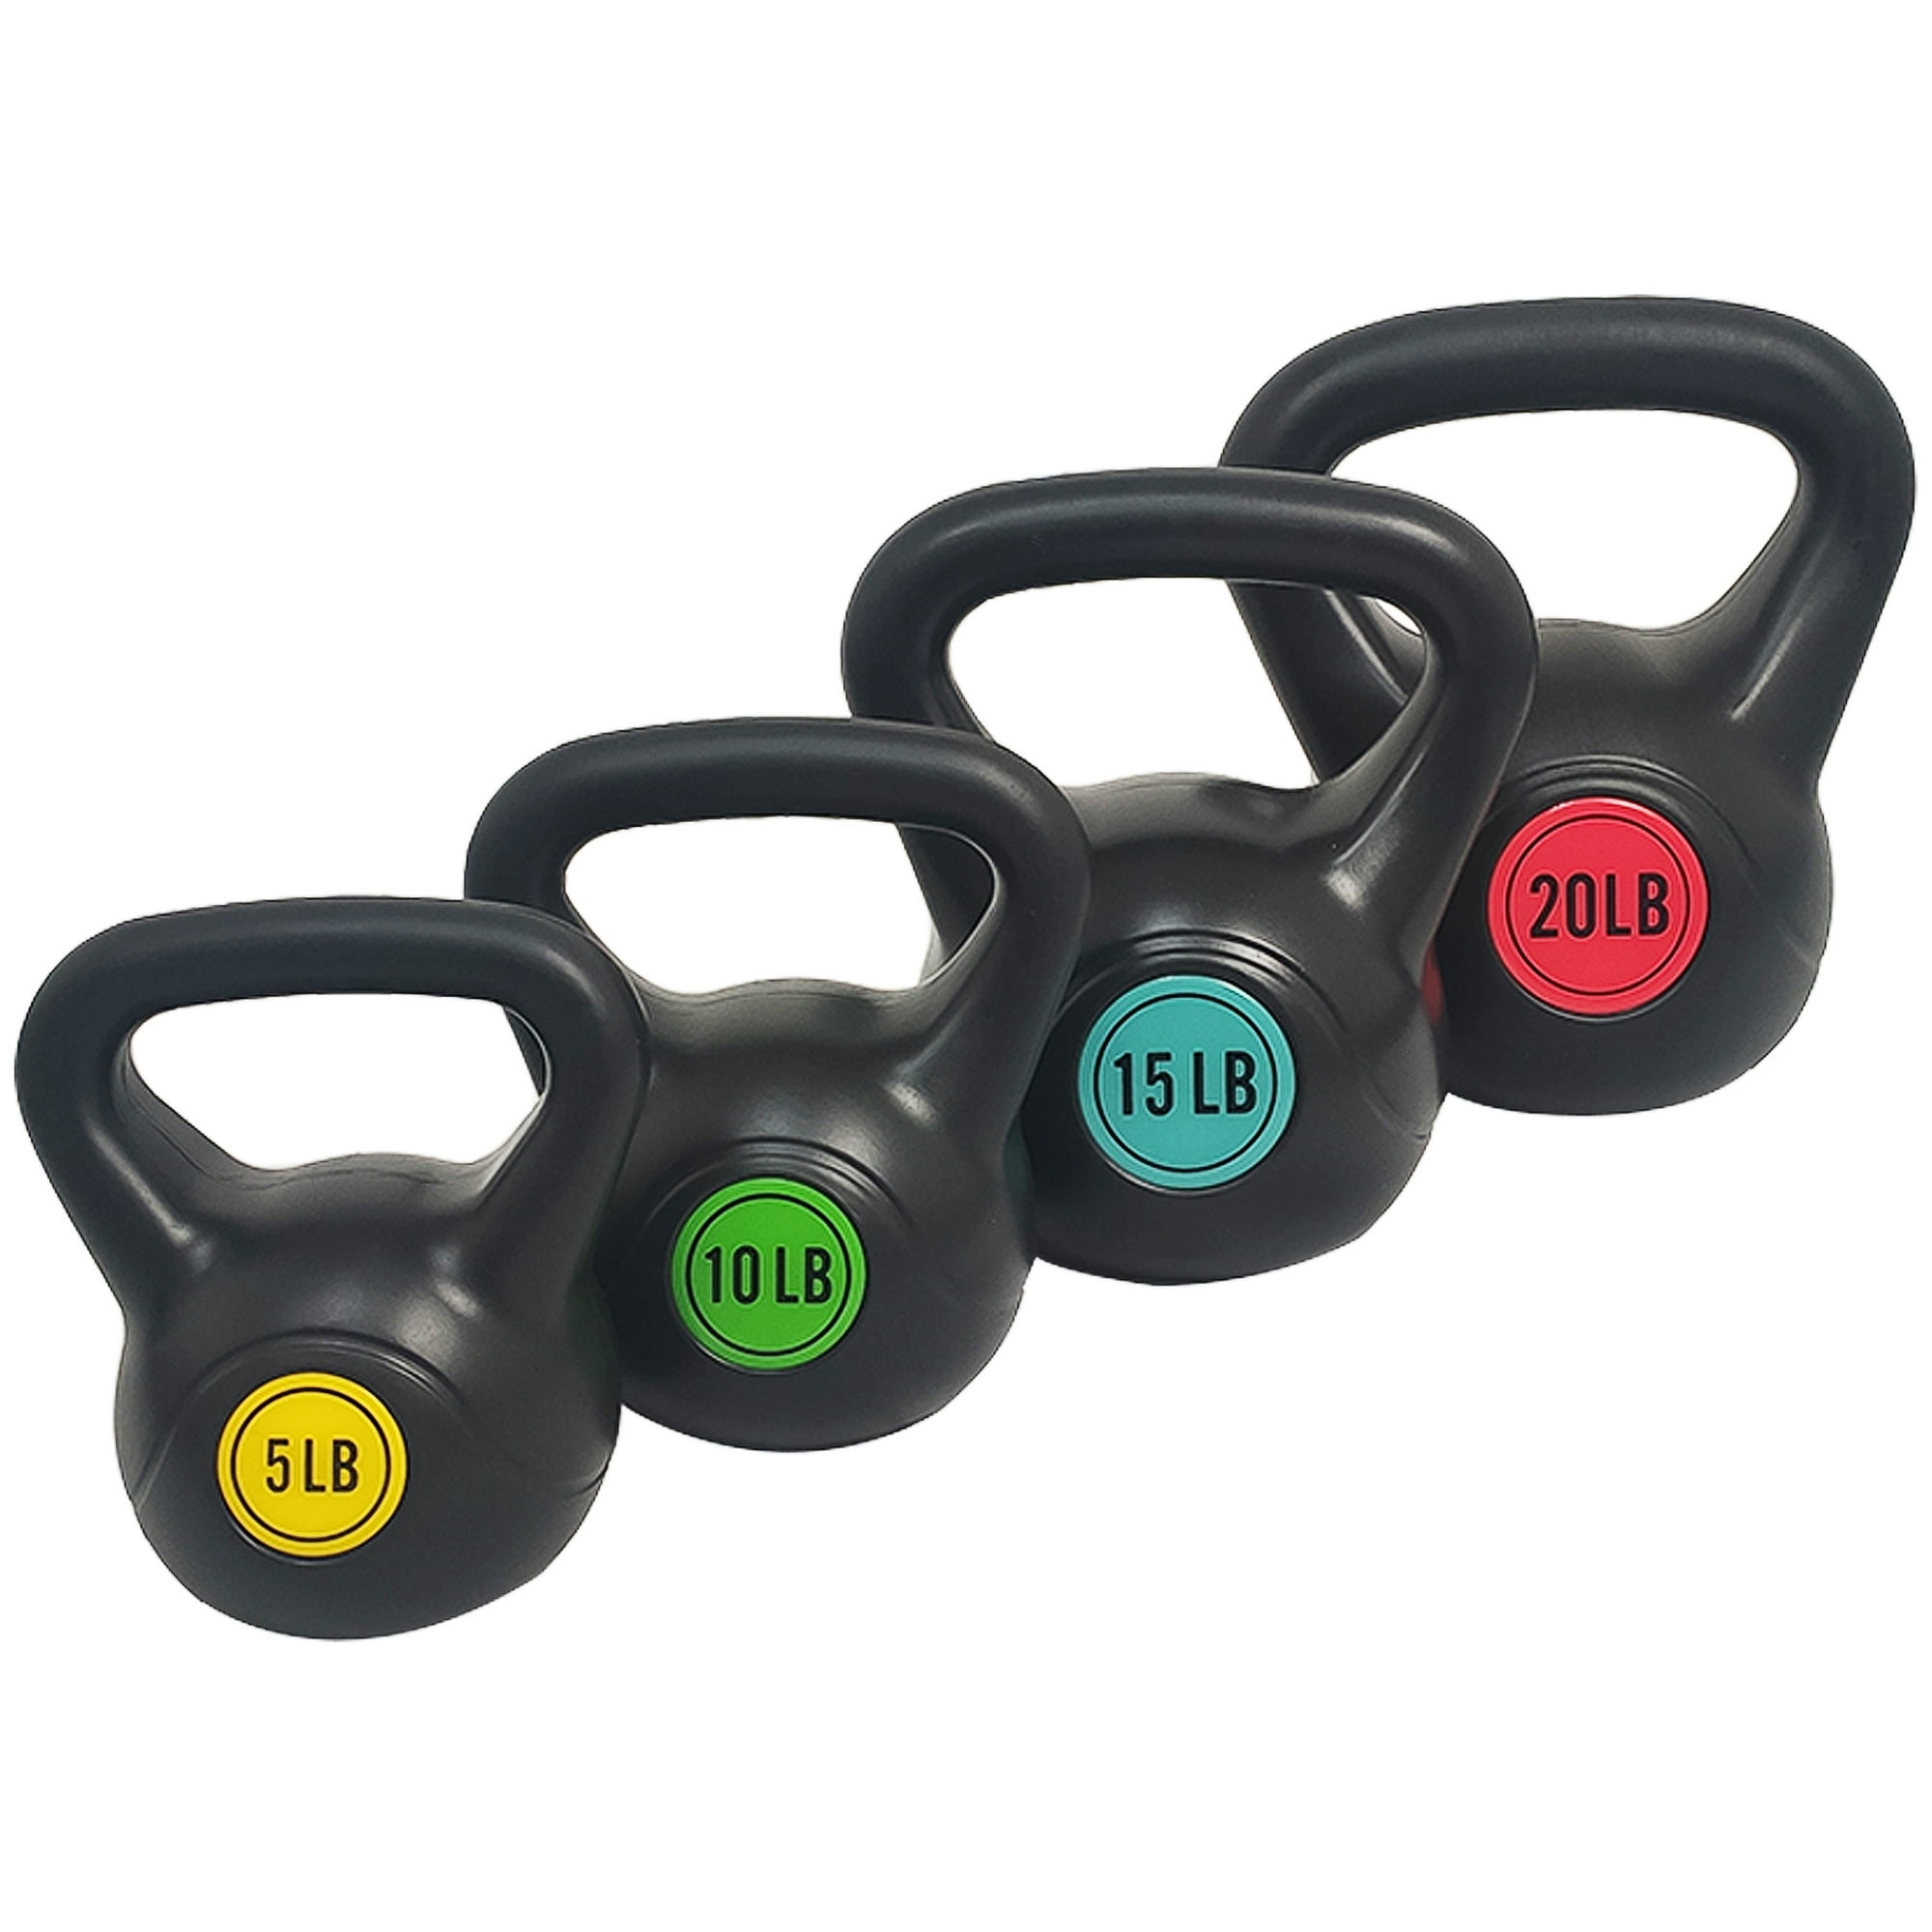 BalanceFrom Wide Grip Kettlebell Exercise Fitness Weight Set, 4-Pieces: 5lb, 10lb, 15lb and 20lb Kettlebells